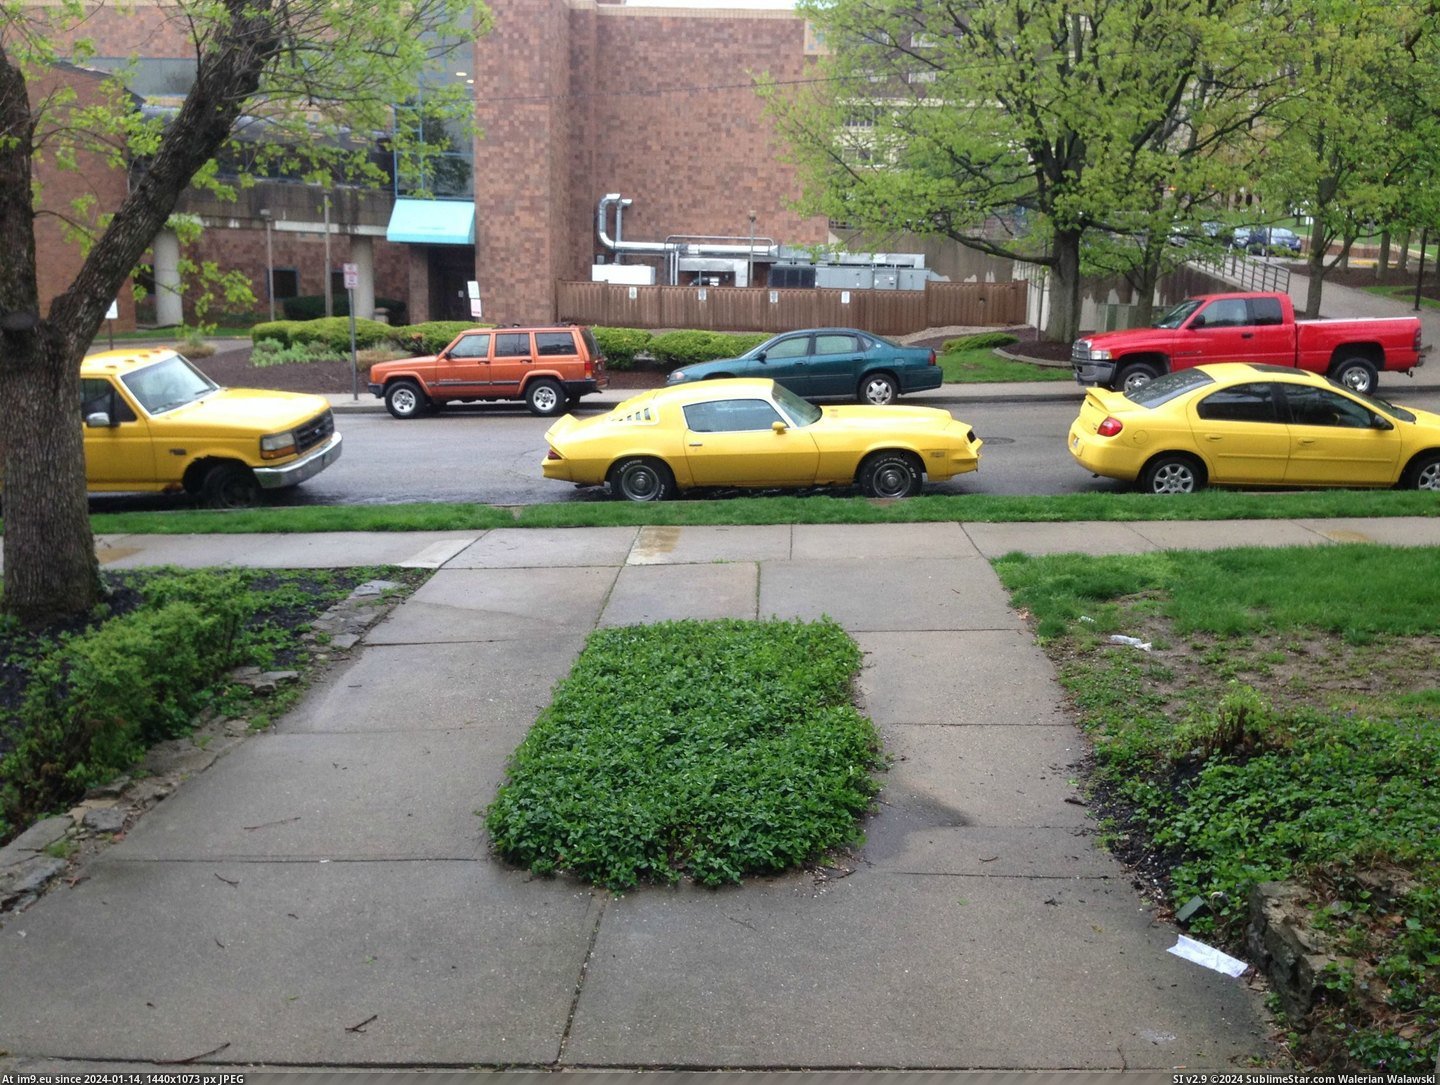 #Morning #Apartment #Row #Parked #Yellow #Cars [Mildlyinteresting] These 3 yellow cars were parked in a row outside my apartment this morning Pic. (Изображение из альбом My r/MILDLYINTERESTING favs))